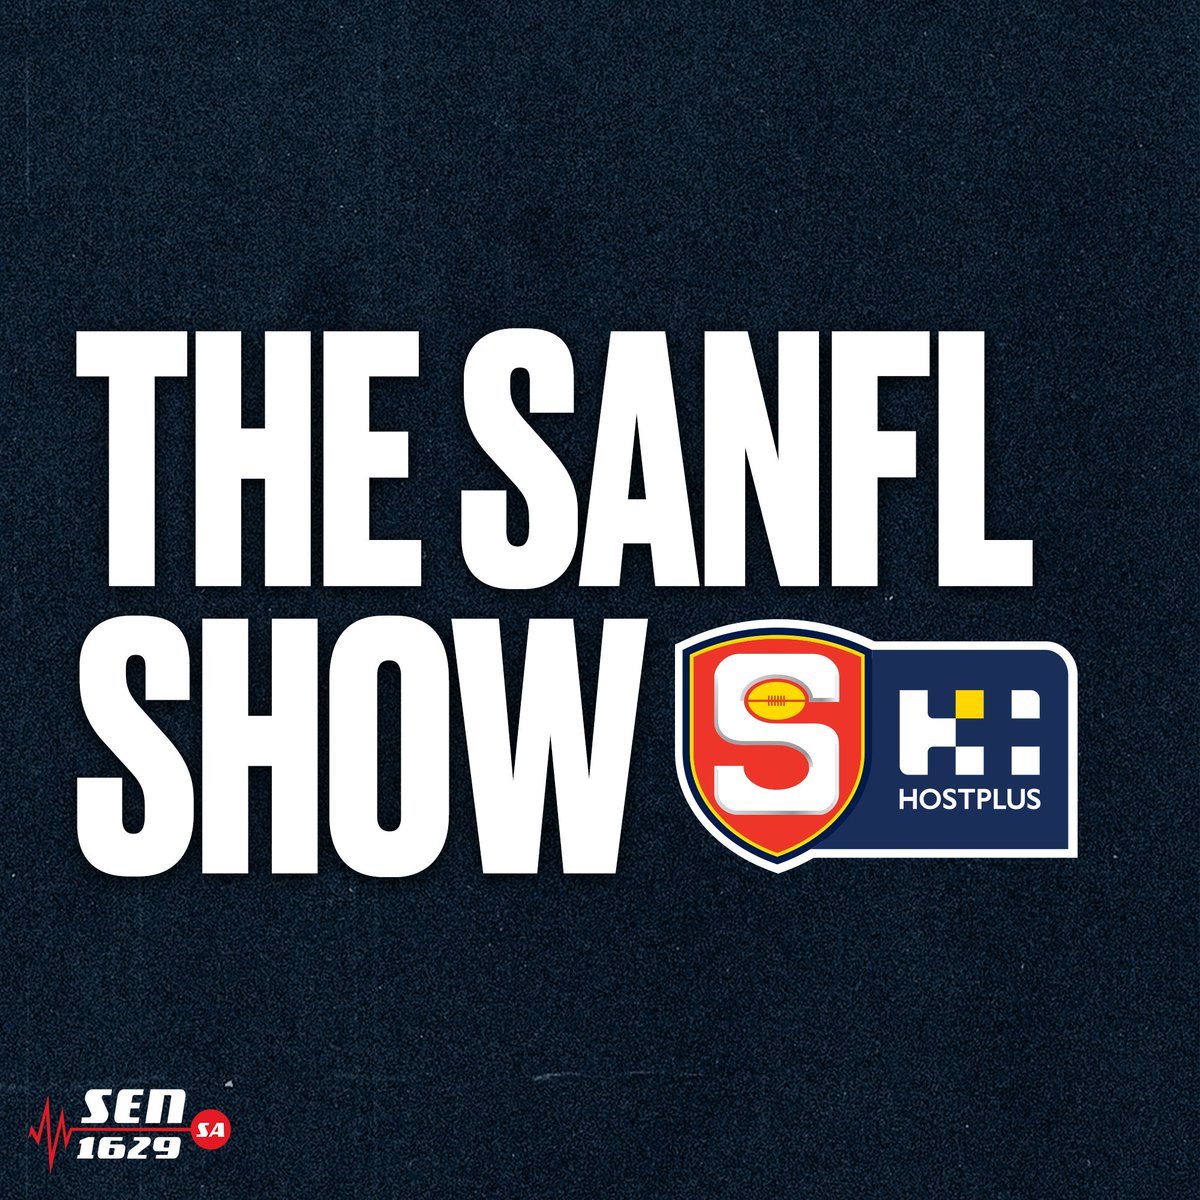 Today's edition of the @SANFL show with @DanielMenzel10 and @jarrodwalsh saw the SANFLs general manager of football @mattduldig05 call in. He spoke about ANZAC Day, the season's start, and the sad incident in Port Lincoln involving @WestAdelaideFC player Sam May. Check out the